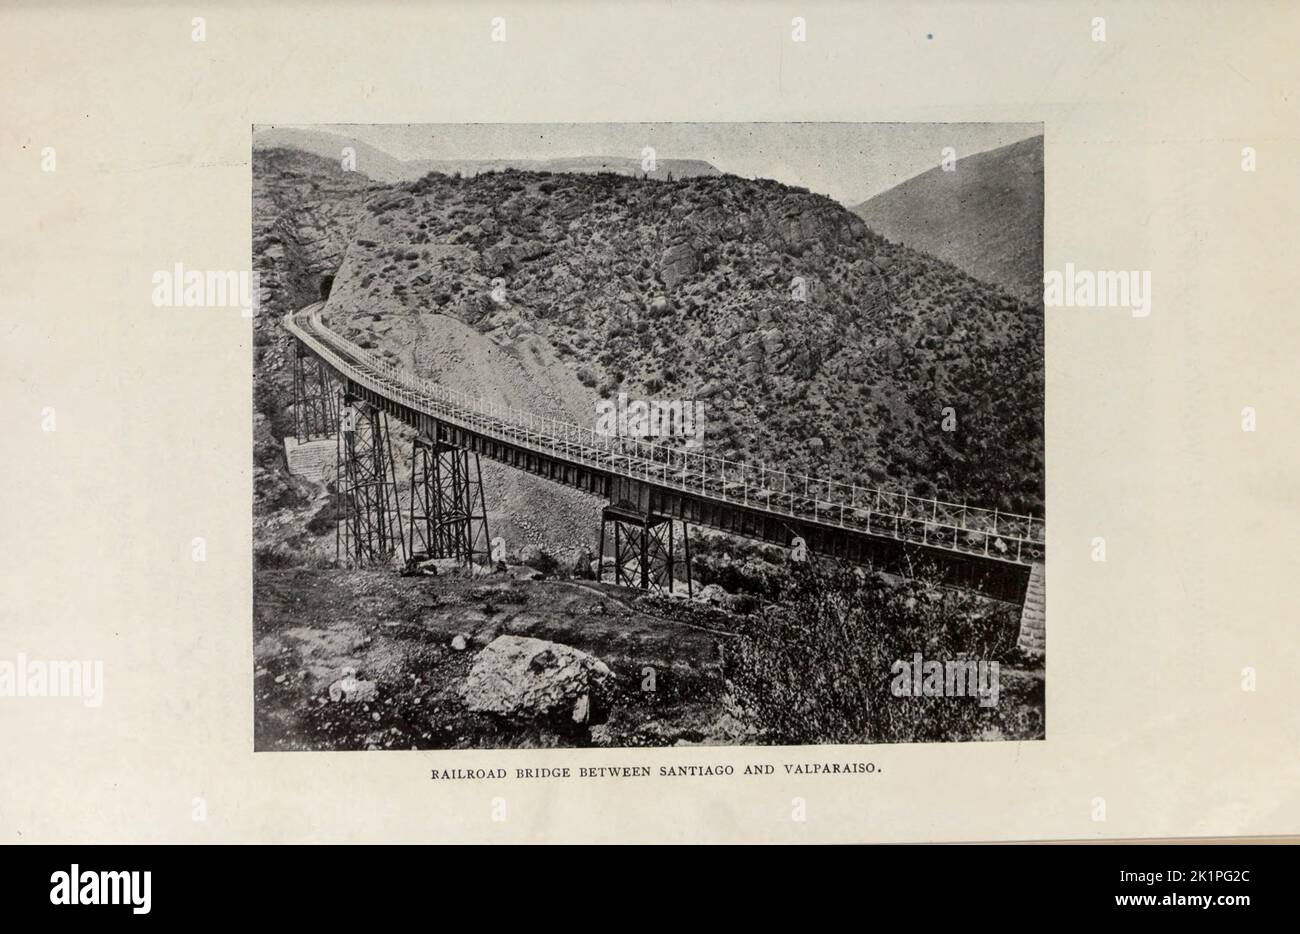 Railway Bridge between Santiago and Valparaiso from the Article The Industrial Development of Chile by Courtenay De Kalb from The Engineering Magazine DEVOTED TO INDUSTRIAL PROGRESS Volume VIII April to September, 1895 NEW YORK The Engineering Magazine Co Stock Photo